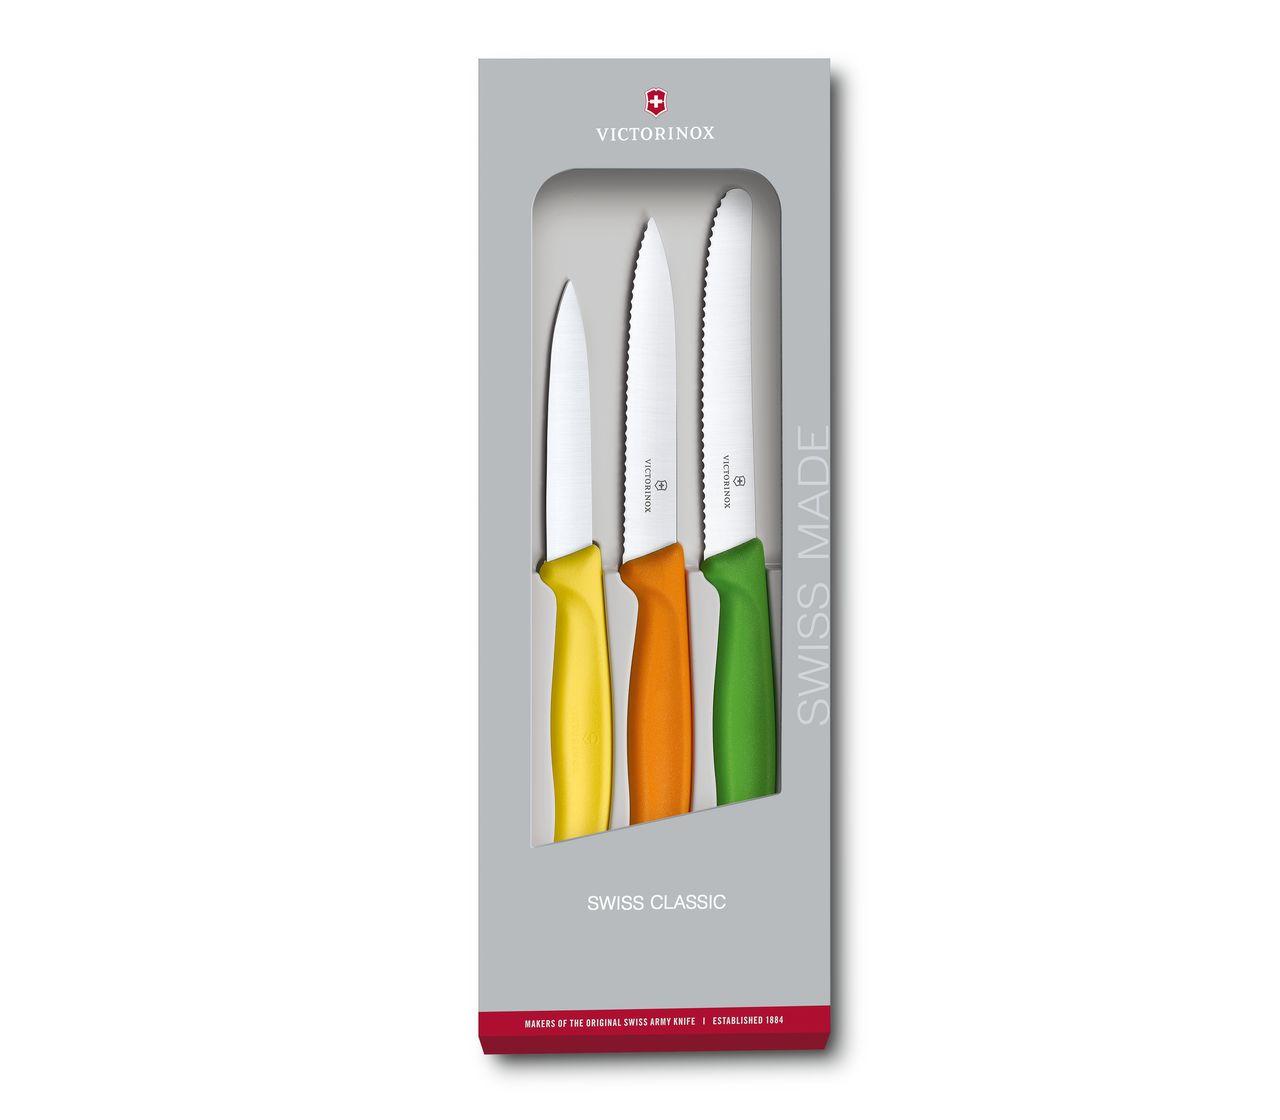 Victorinox Swiss Classic Paring Knife Set, 3 Pieces in